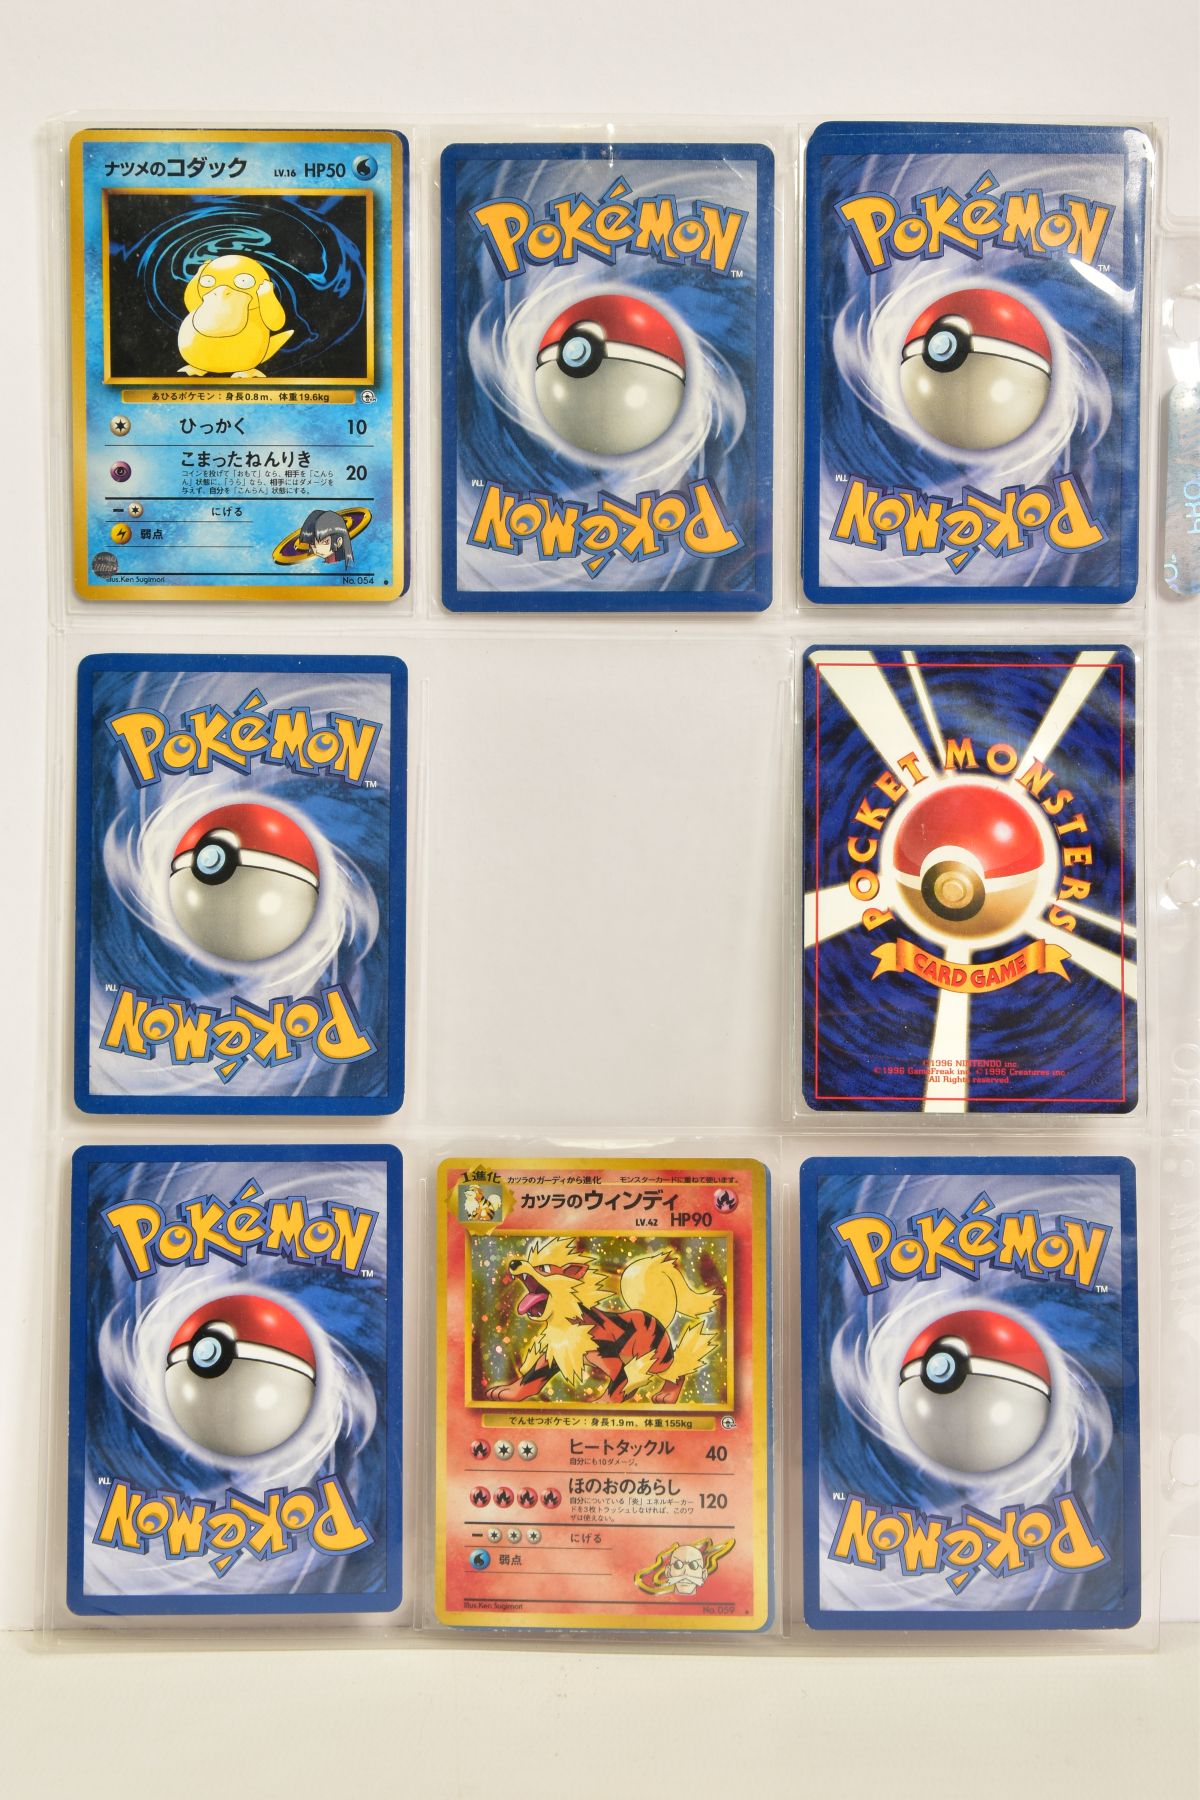 A QUANTITY OF POKEMON TCG CARDS, cards are assorted from Base Set, Base Set 2, Jungle, Fossil, - Image 15 of 46